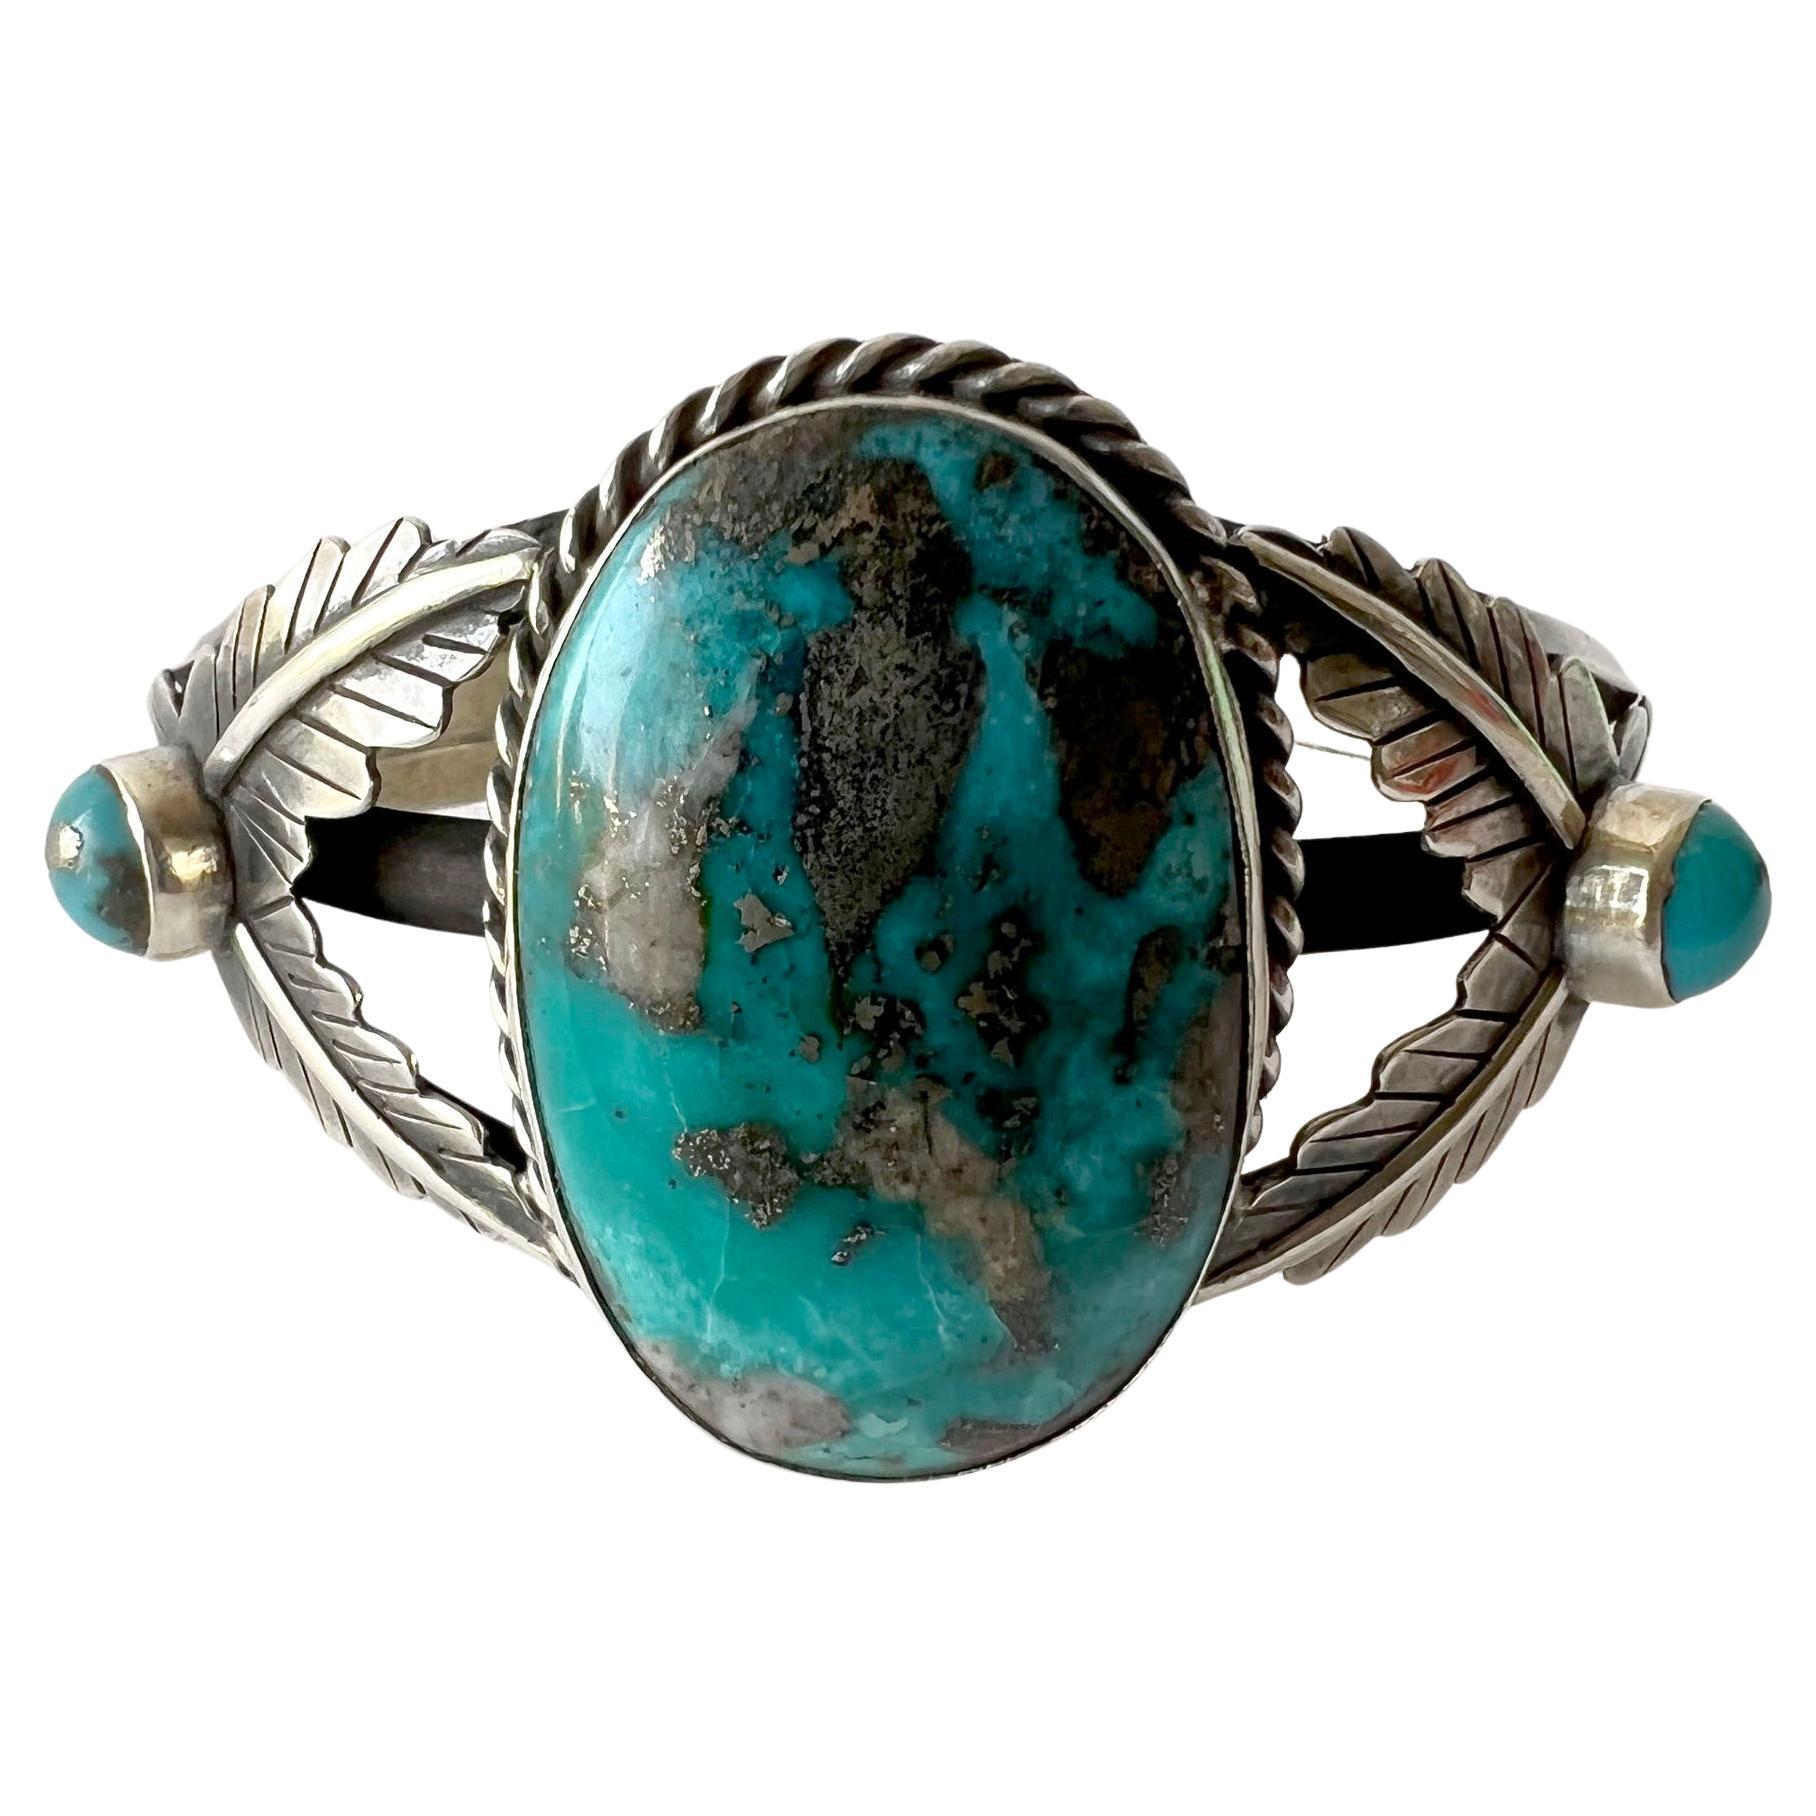 Native American Sterling Silver Feather Turquoise Cuff Bracelet